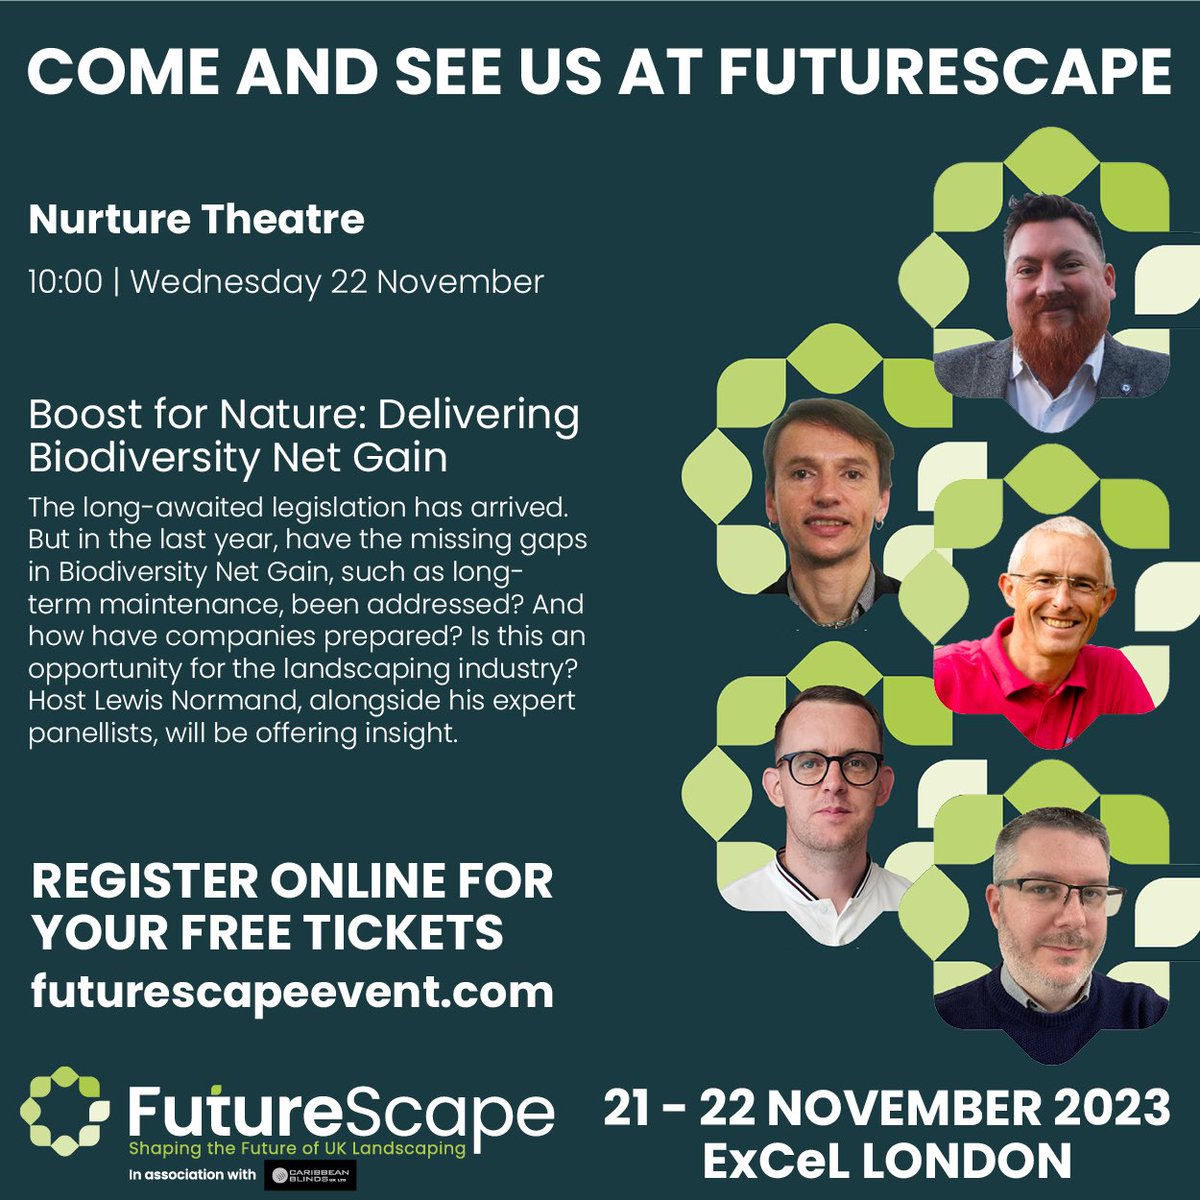 Join me and this talented panel next week. Wednesday 22nd November @ExCeLLondon for the @FutureScapeUK show. #BiodiversityNetGain is our topic at 10am in the Nurture Theatre. Hope you can join us for what is sure to be a fascinating look into this important subject.